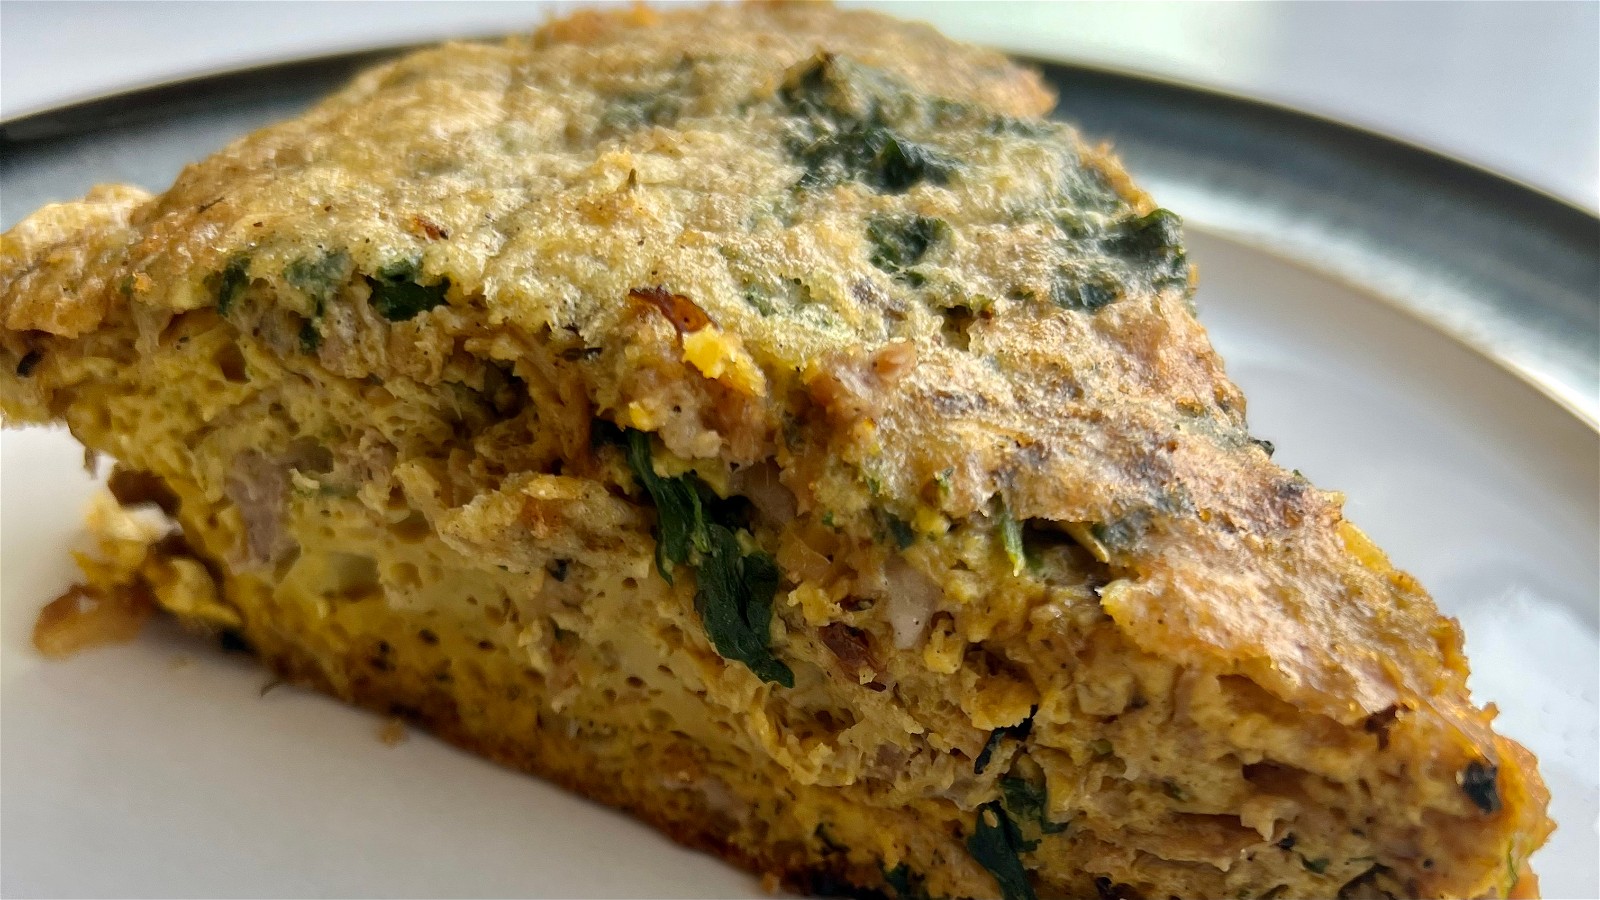 Image of Frittata with Caramelized Cabbage, Italian Sausage, Greens and Herbs